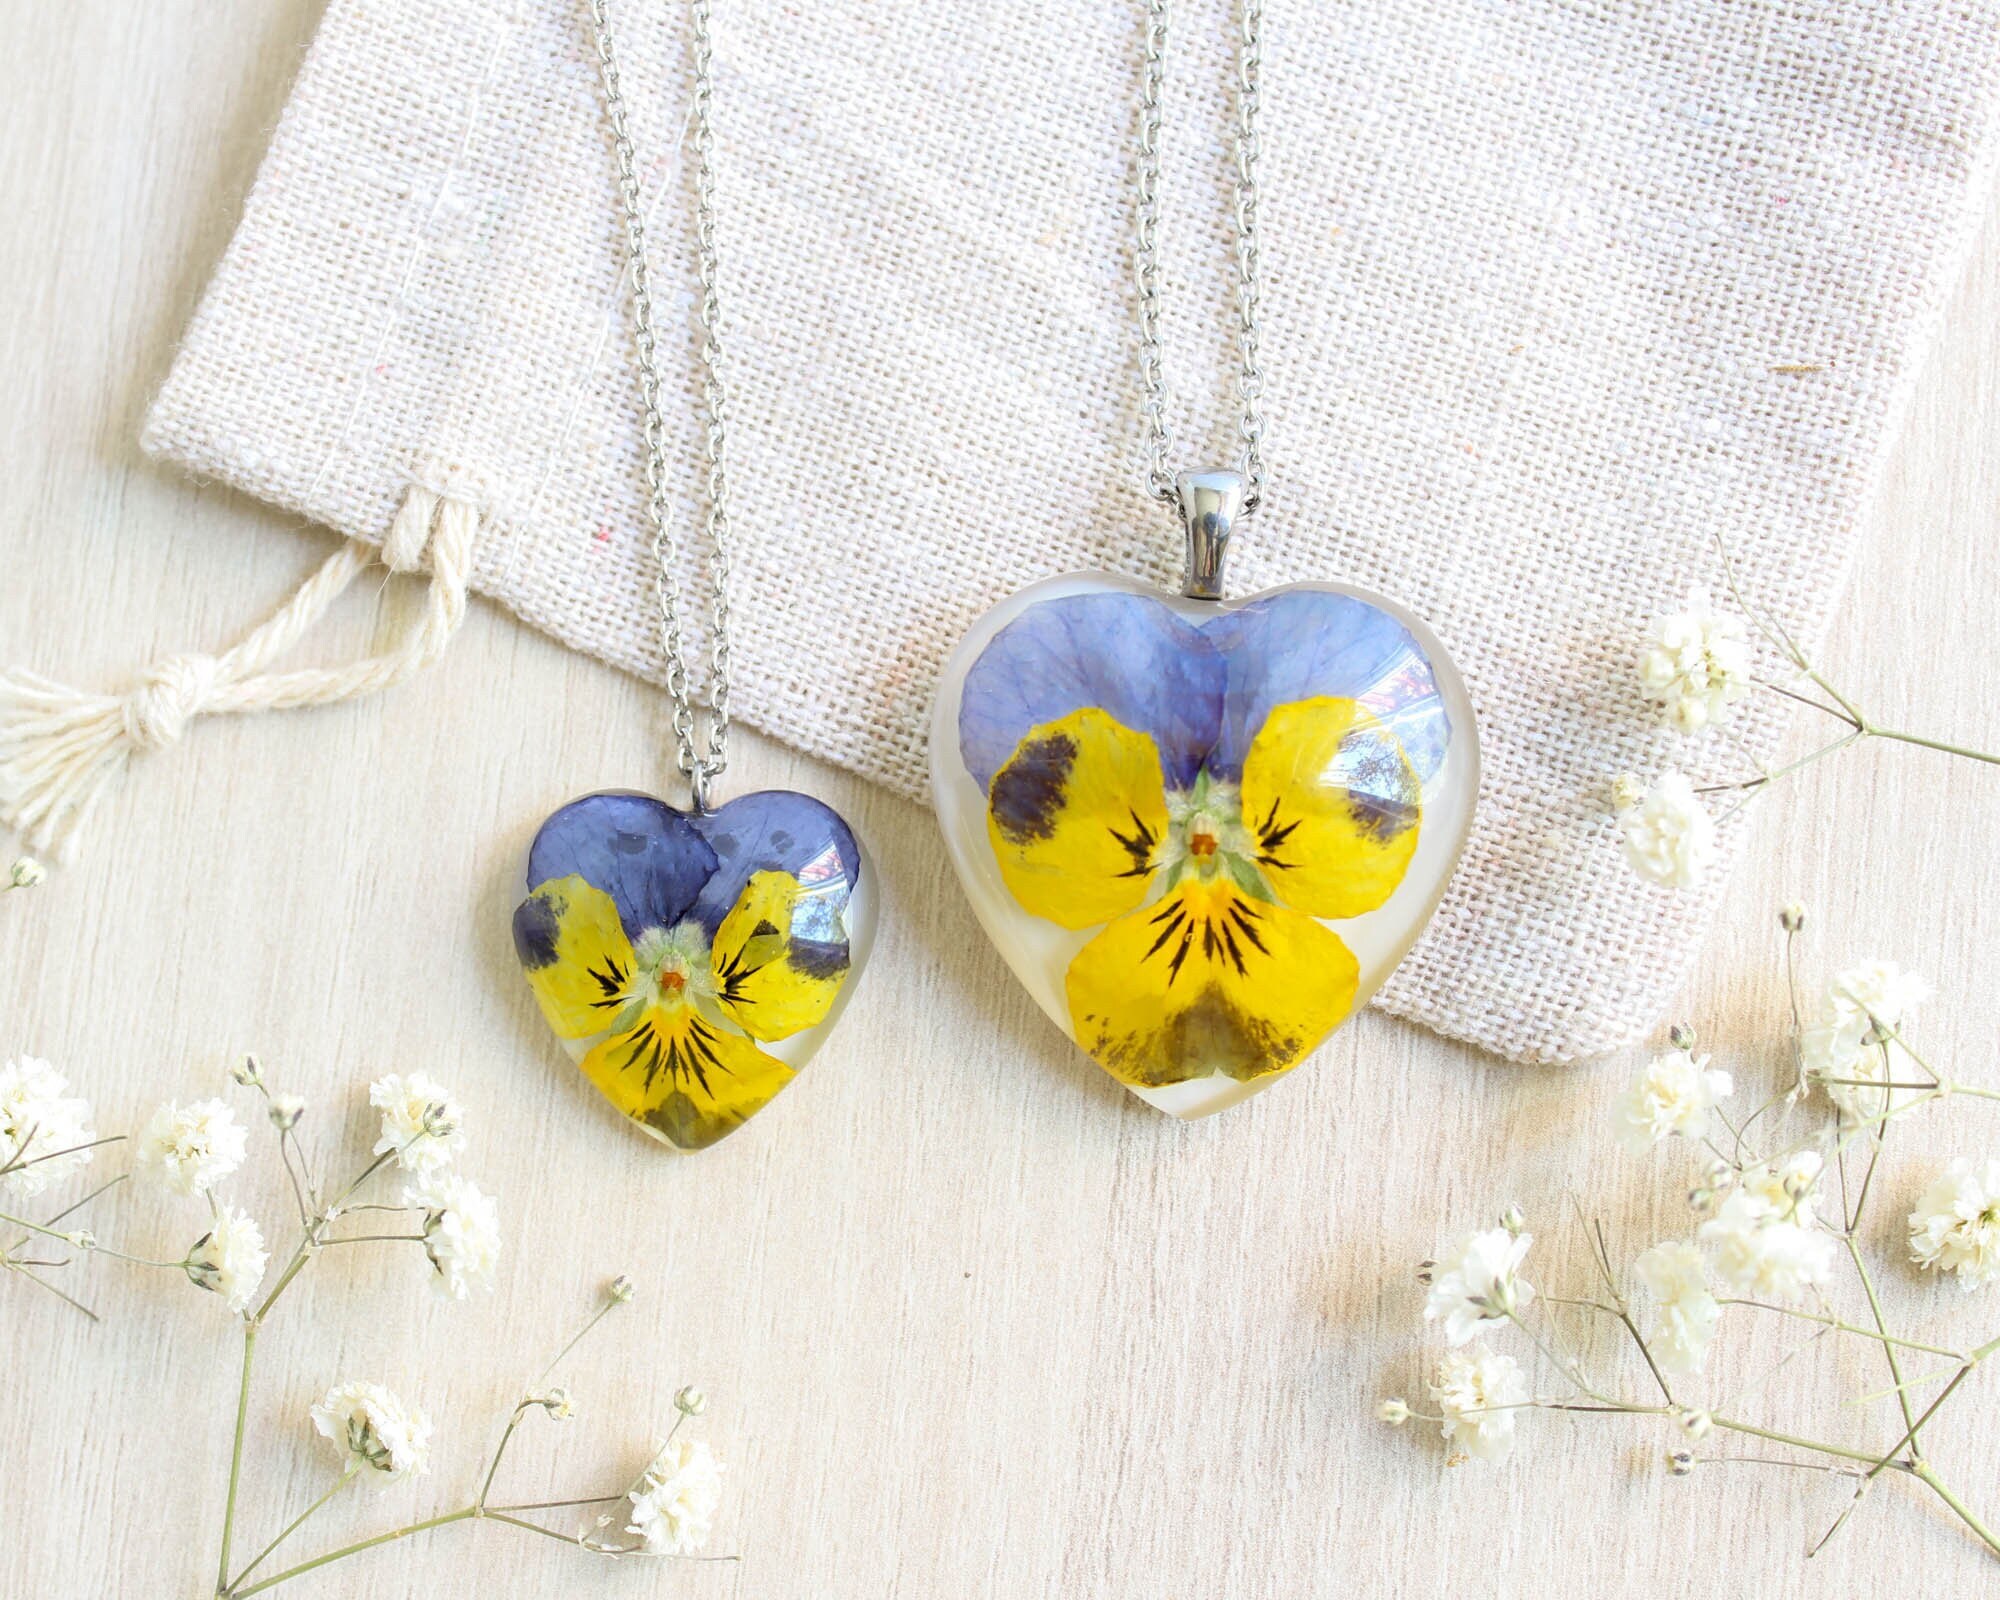 Buy Outgeek Pressed Flower Necklace Creative Flower Pendant Necklace Resin Necklace  Pressed Flower Necklaces Flower at Amazon.in